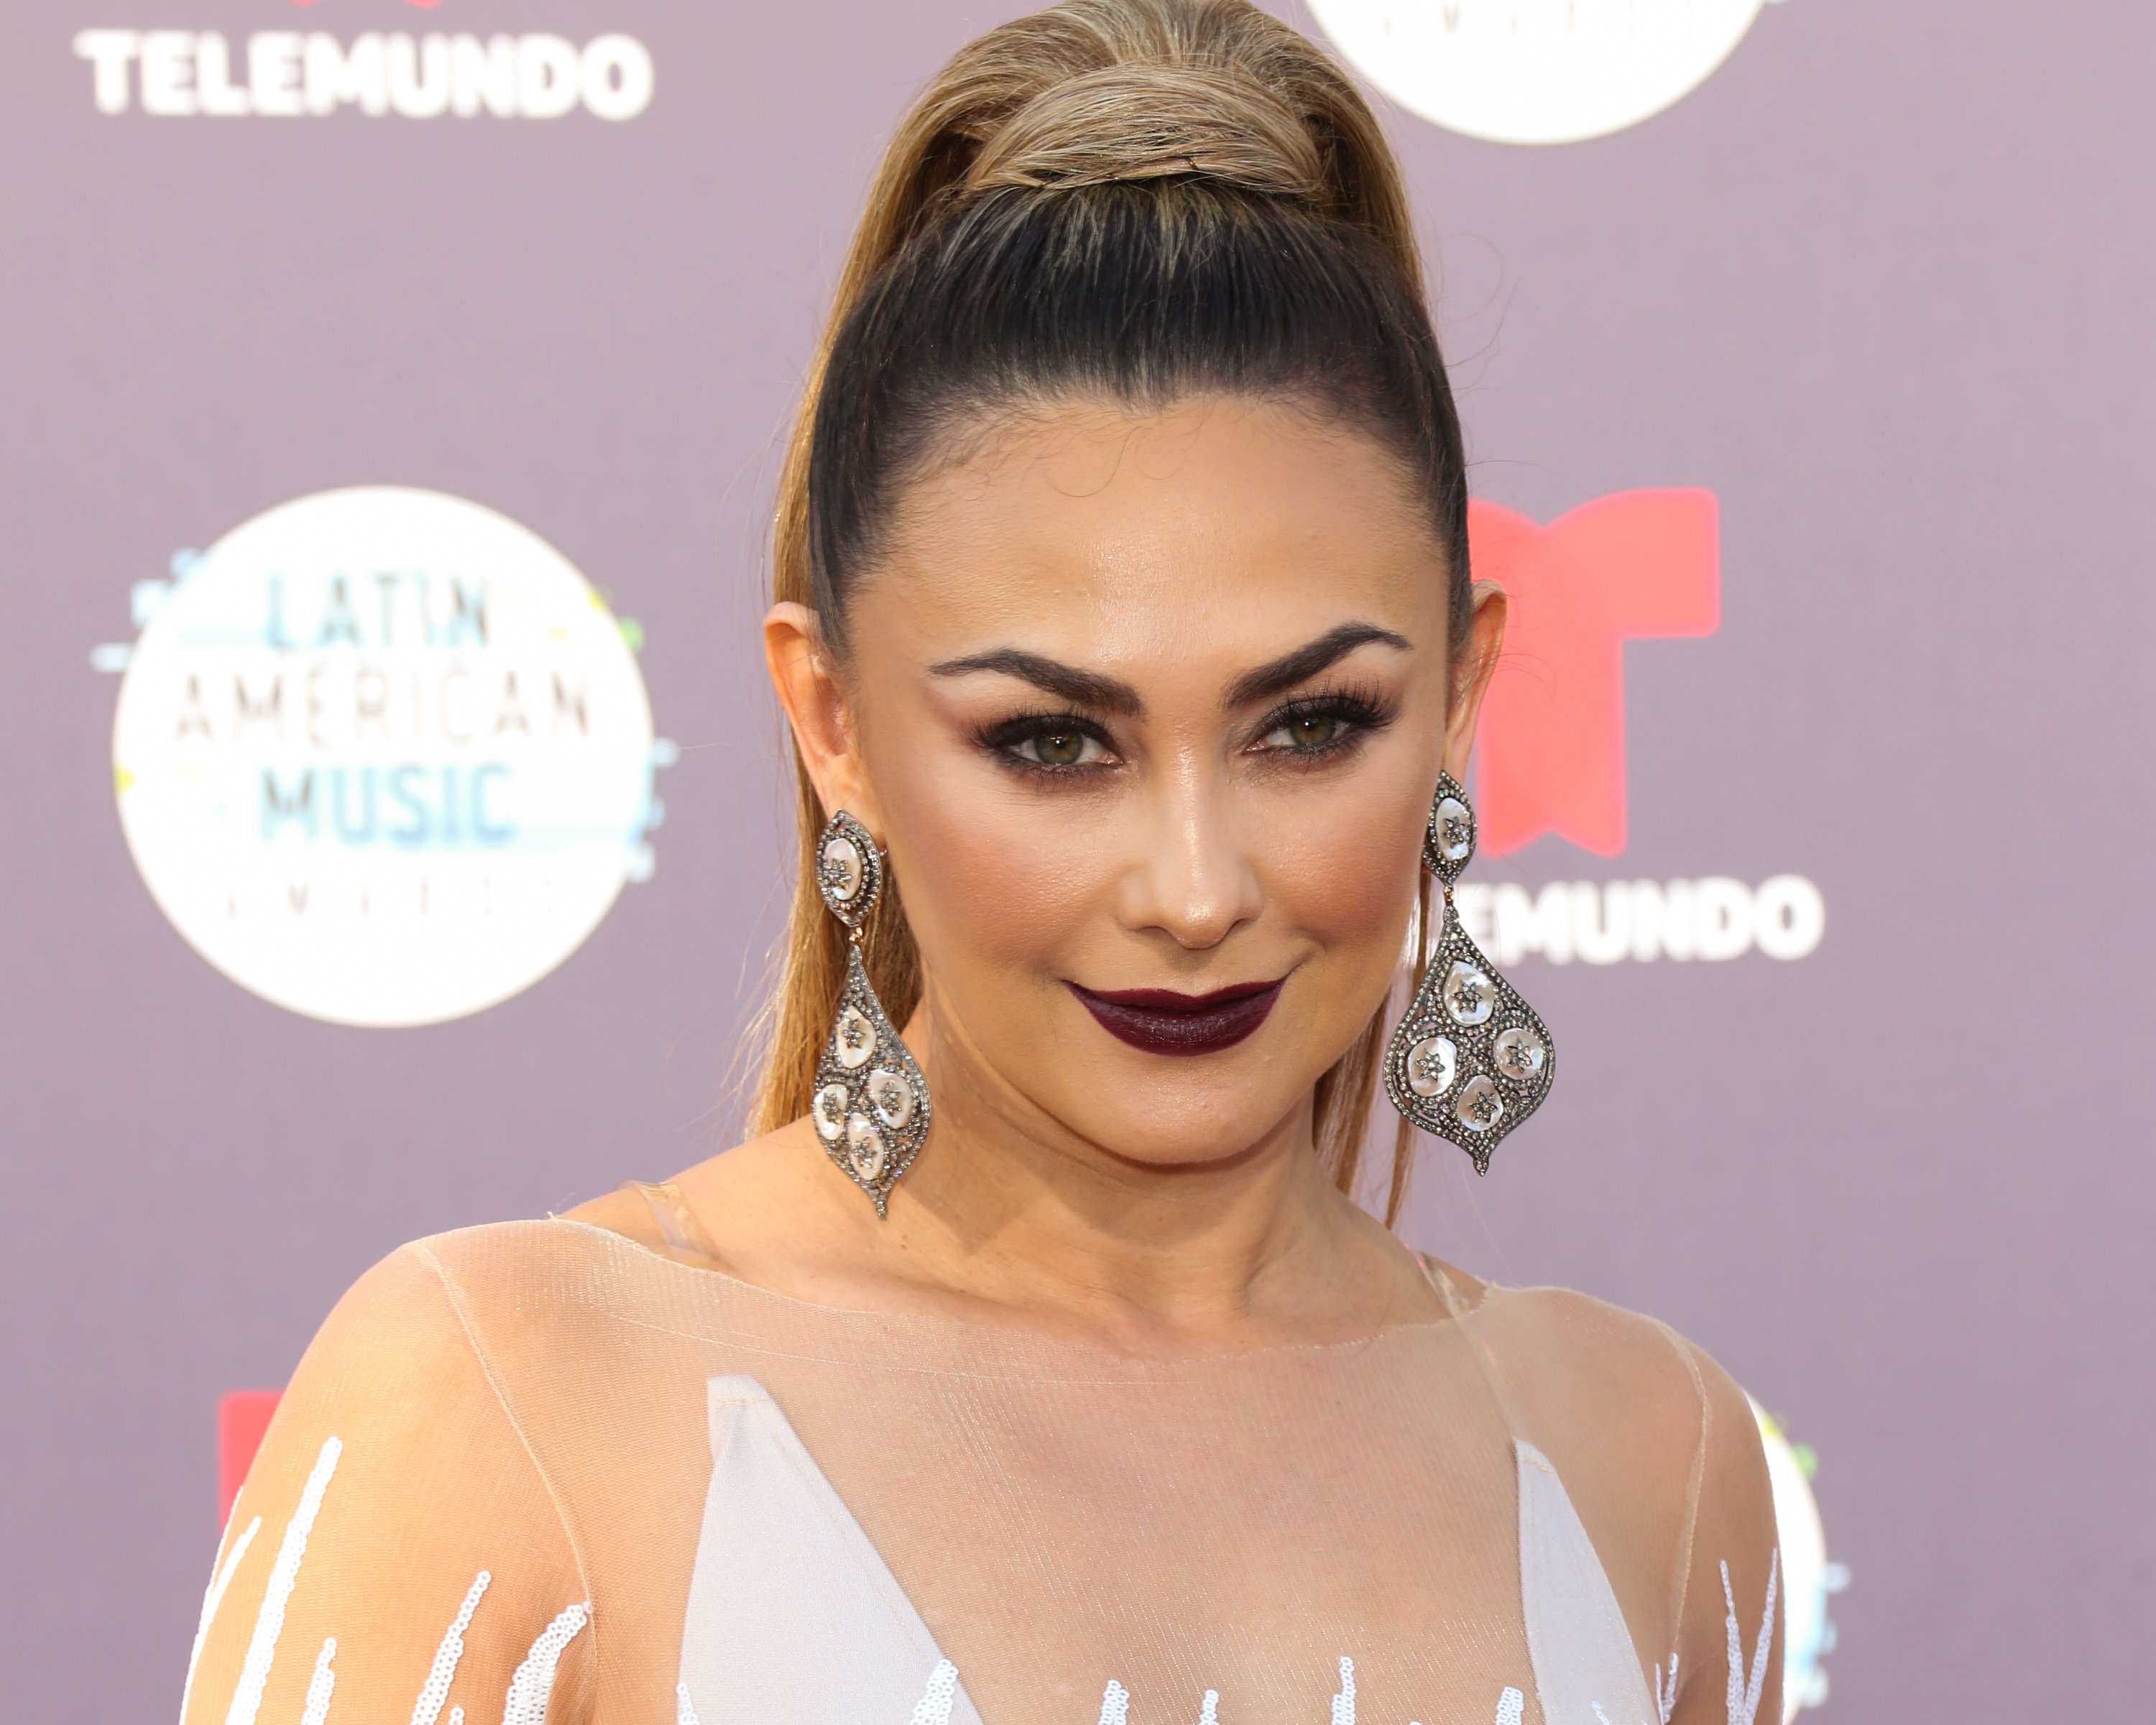 Aracely Arambula at the 2018 Latin American Music Awards in 2018, in Hollywood. | Source: Getty Images